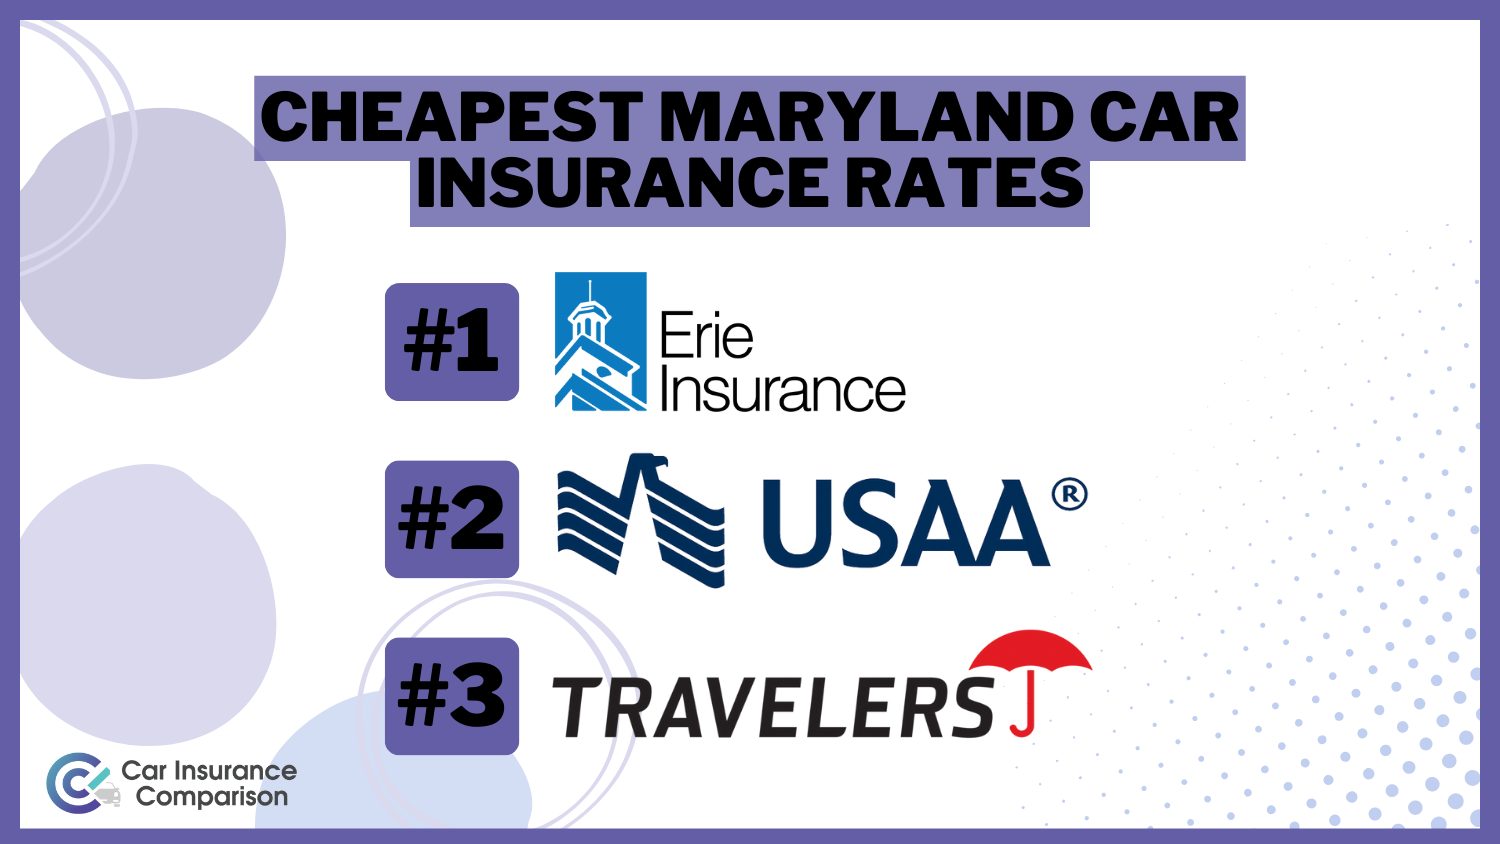 Cheapest Maryland Car Insurance Rates: Erie, USAA, and Travelers.